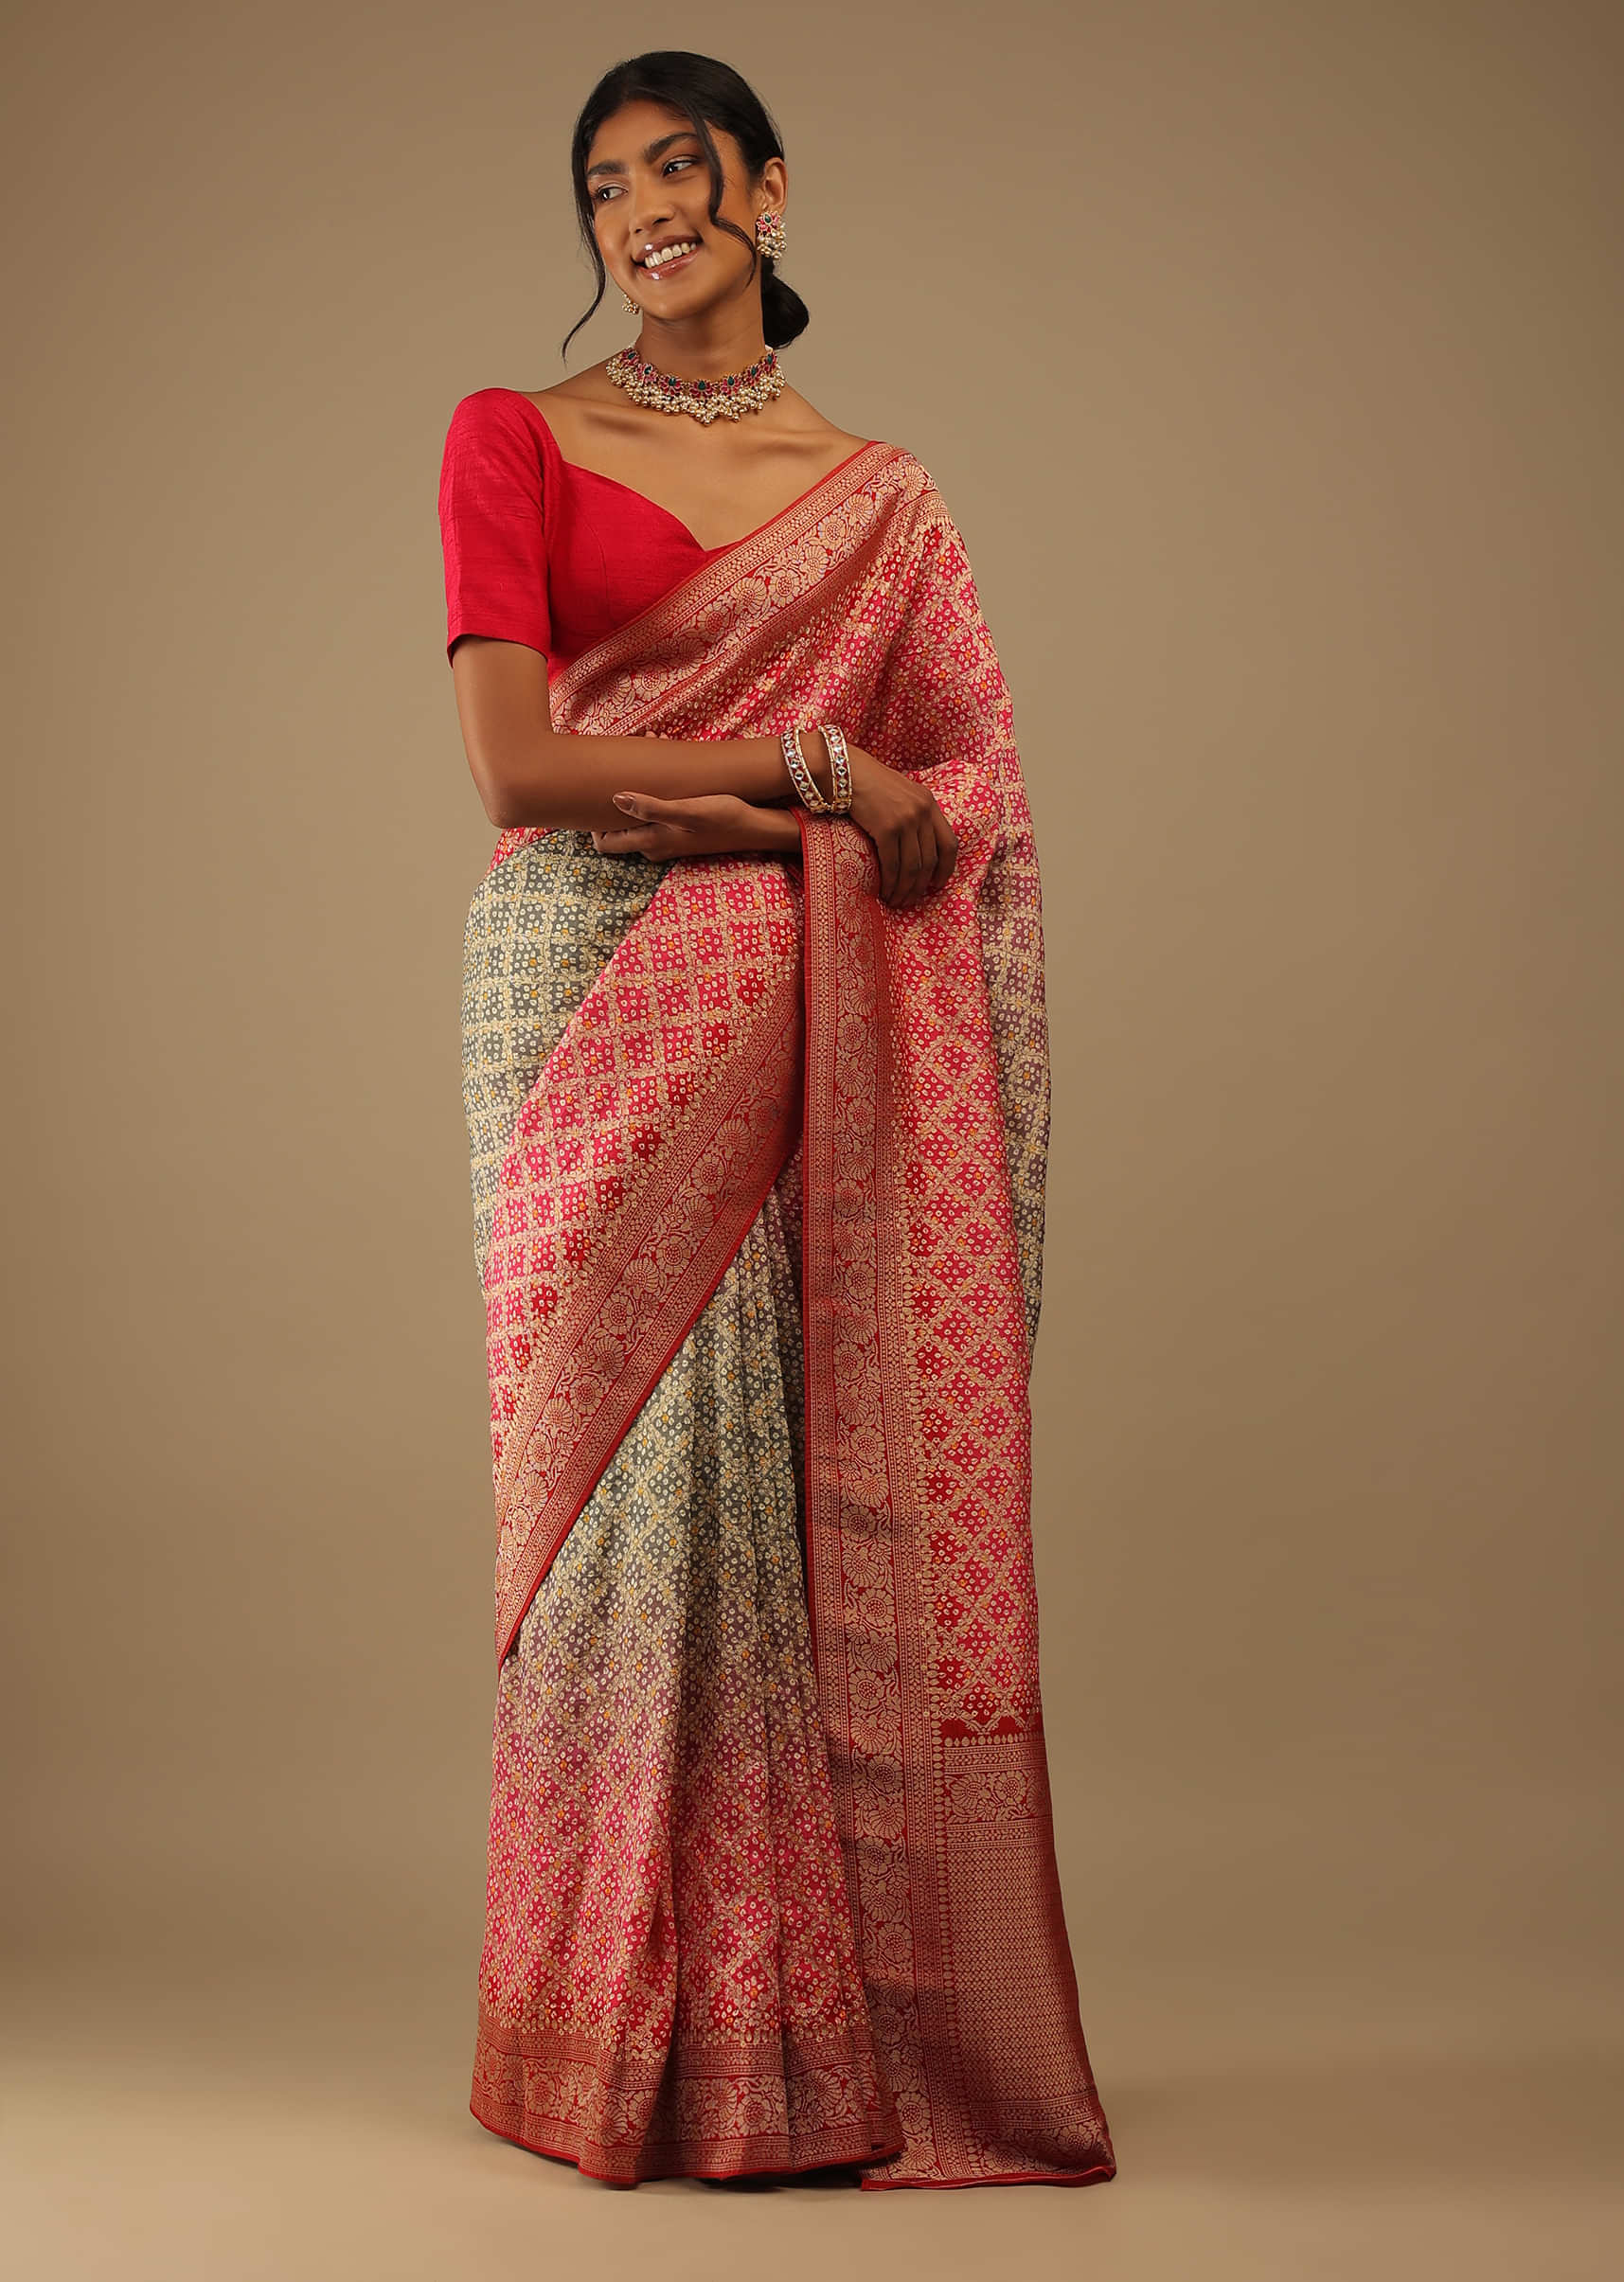 Multicolor Saree In Digital Bandhani Print With Zari Embroidery, Crafted In Brocade Silk With Golden Zari In Geometrical Moroccon Jaal